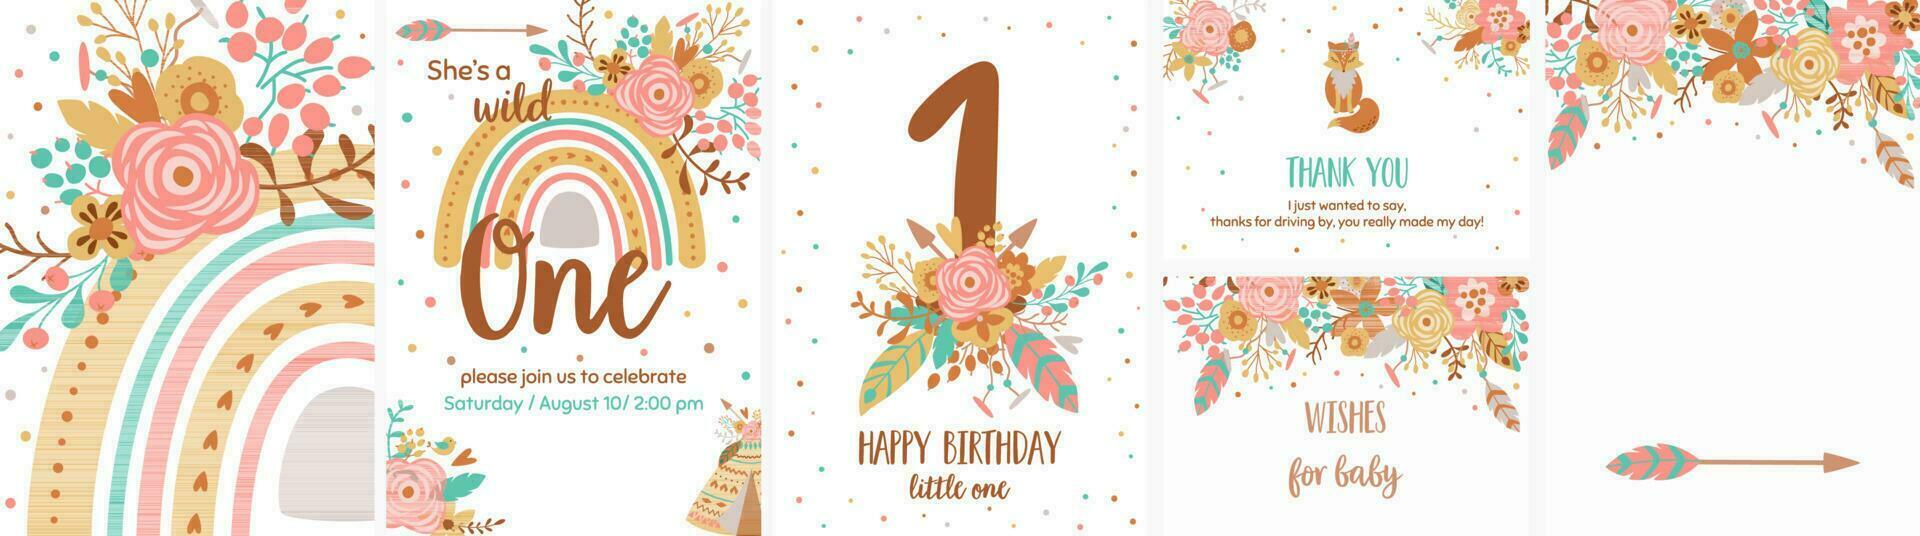 Boho birthday. Baby boho first birthday card template set. Pink tribal floral rainbow collection banners. Bohemian vector illustration. Little one rainbow. Wild tribal kids birthday party posters.